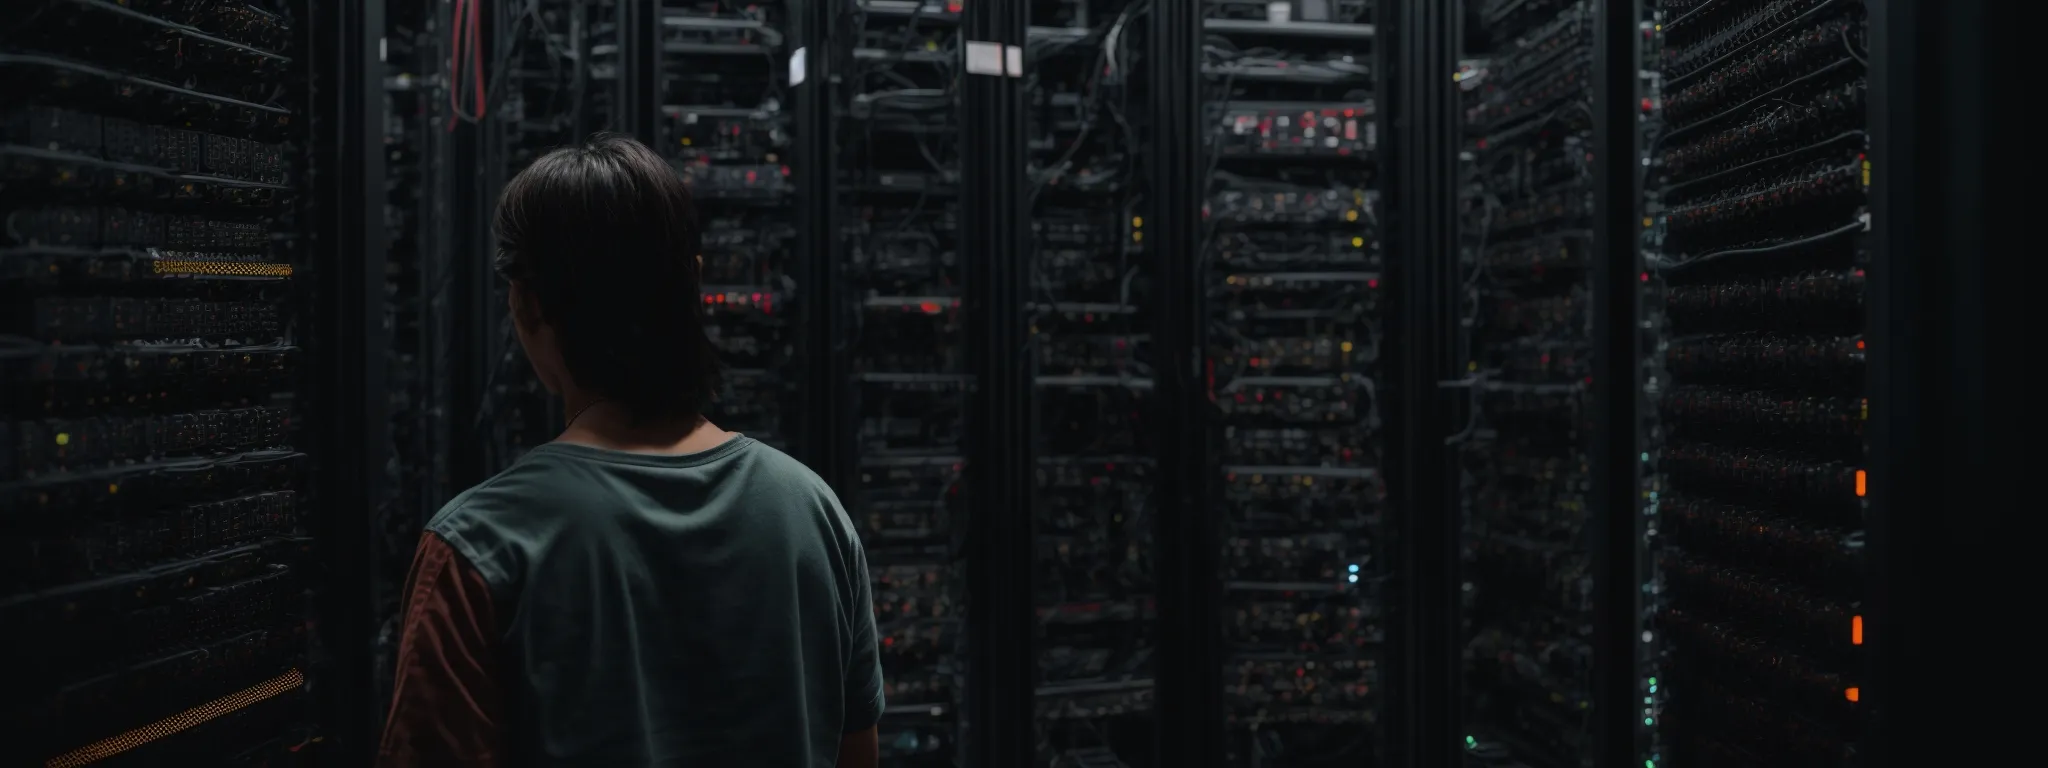 a person confidently adjusts complex server rack configurations, symbolizing the optimization of technical seo foundations.